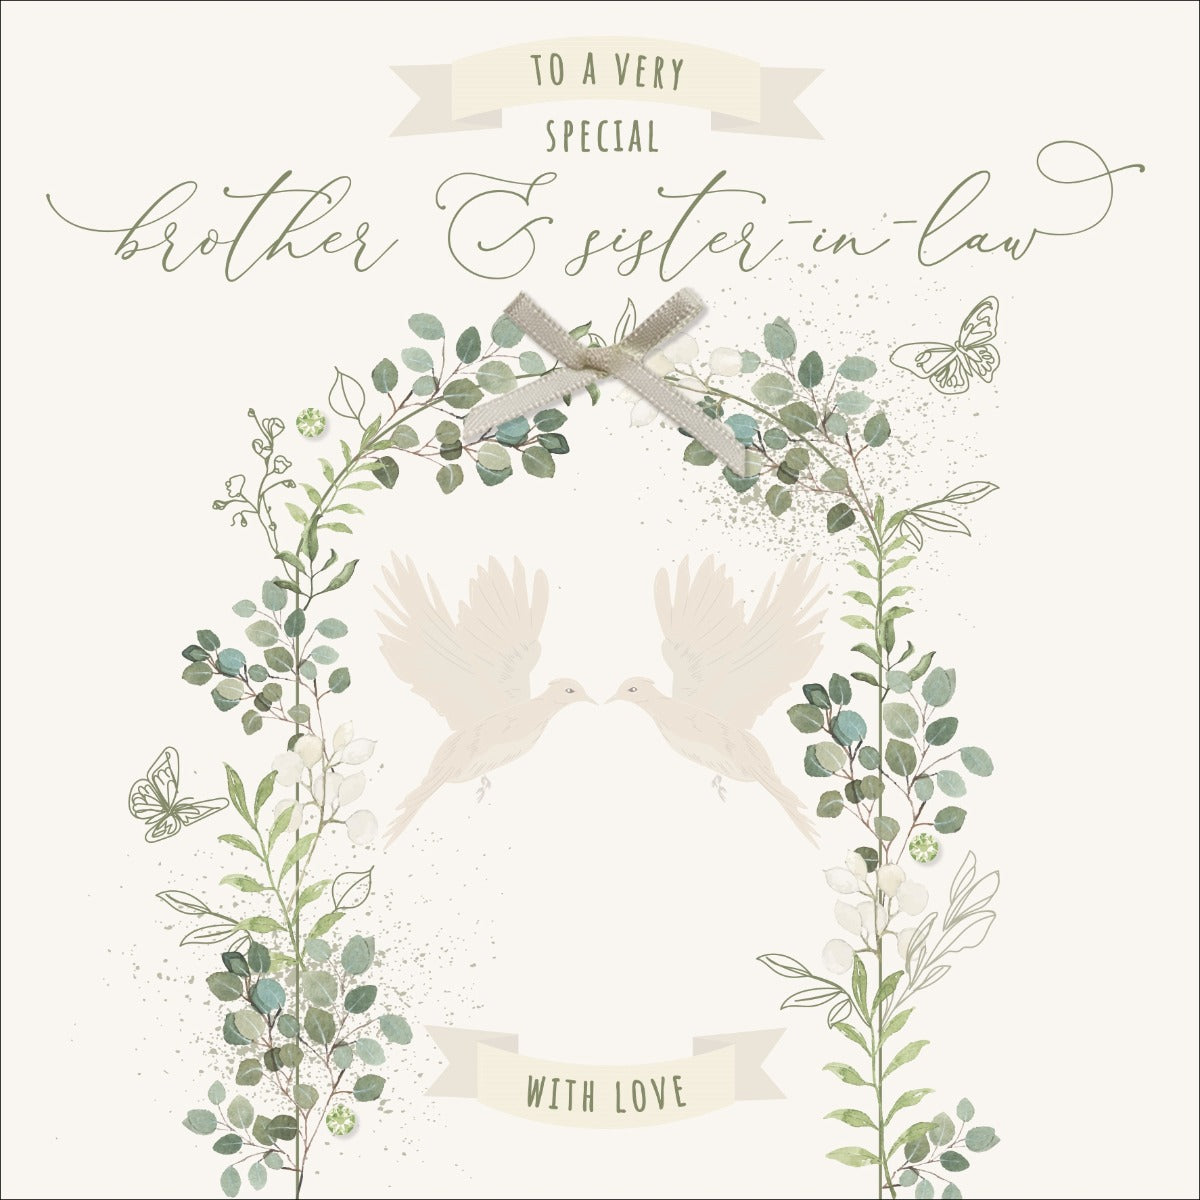 Brother & Sister-in-Law Wedding/Anniversary Botanical Card